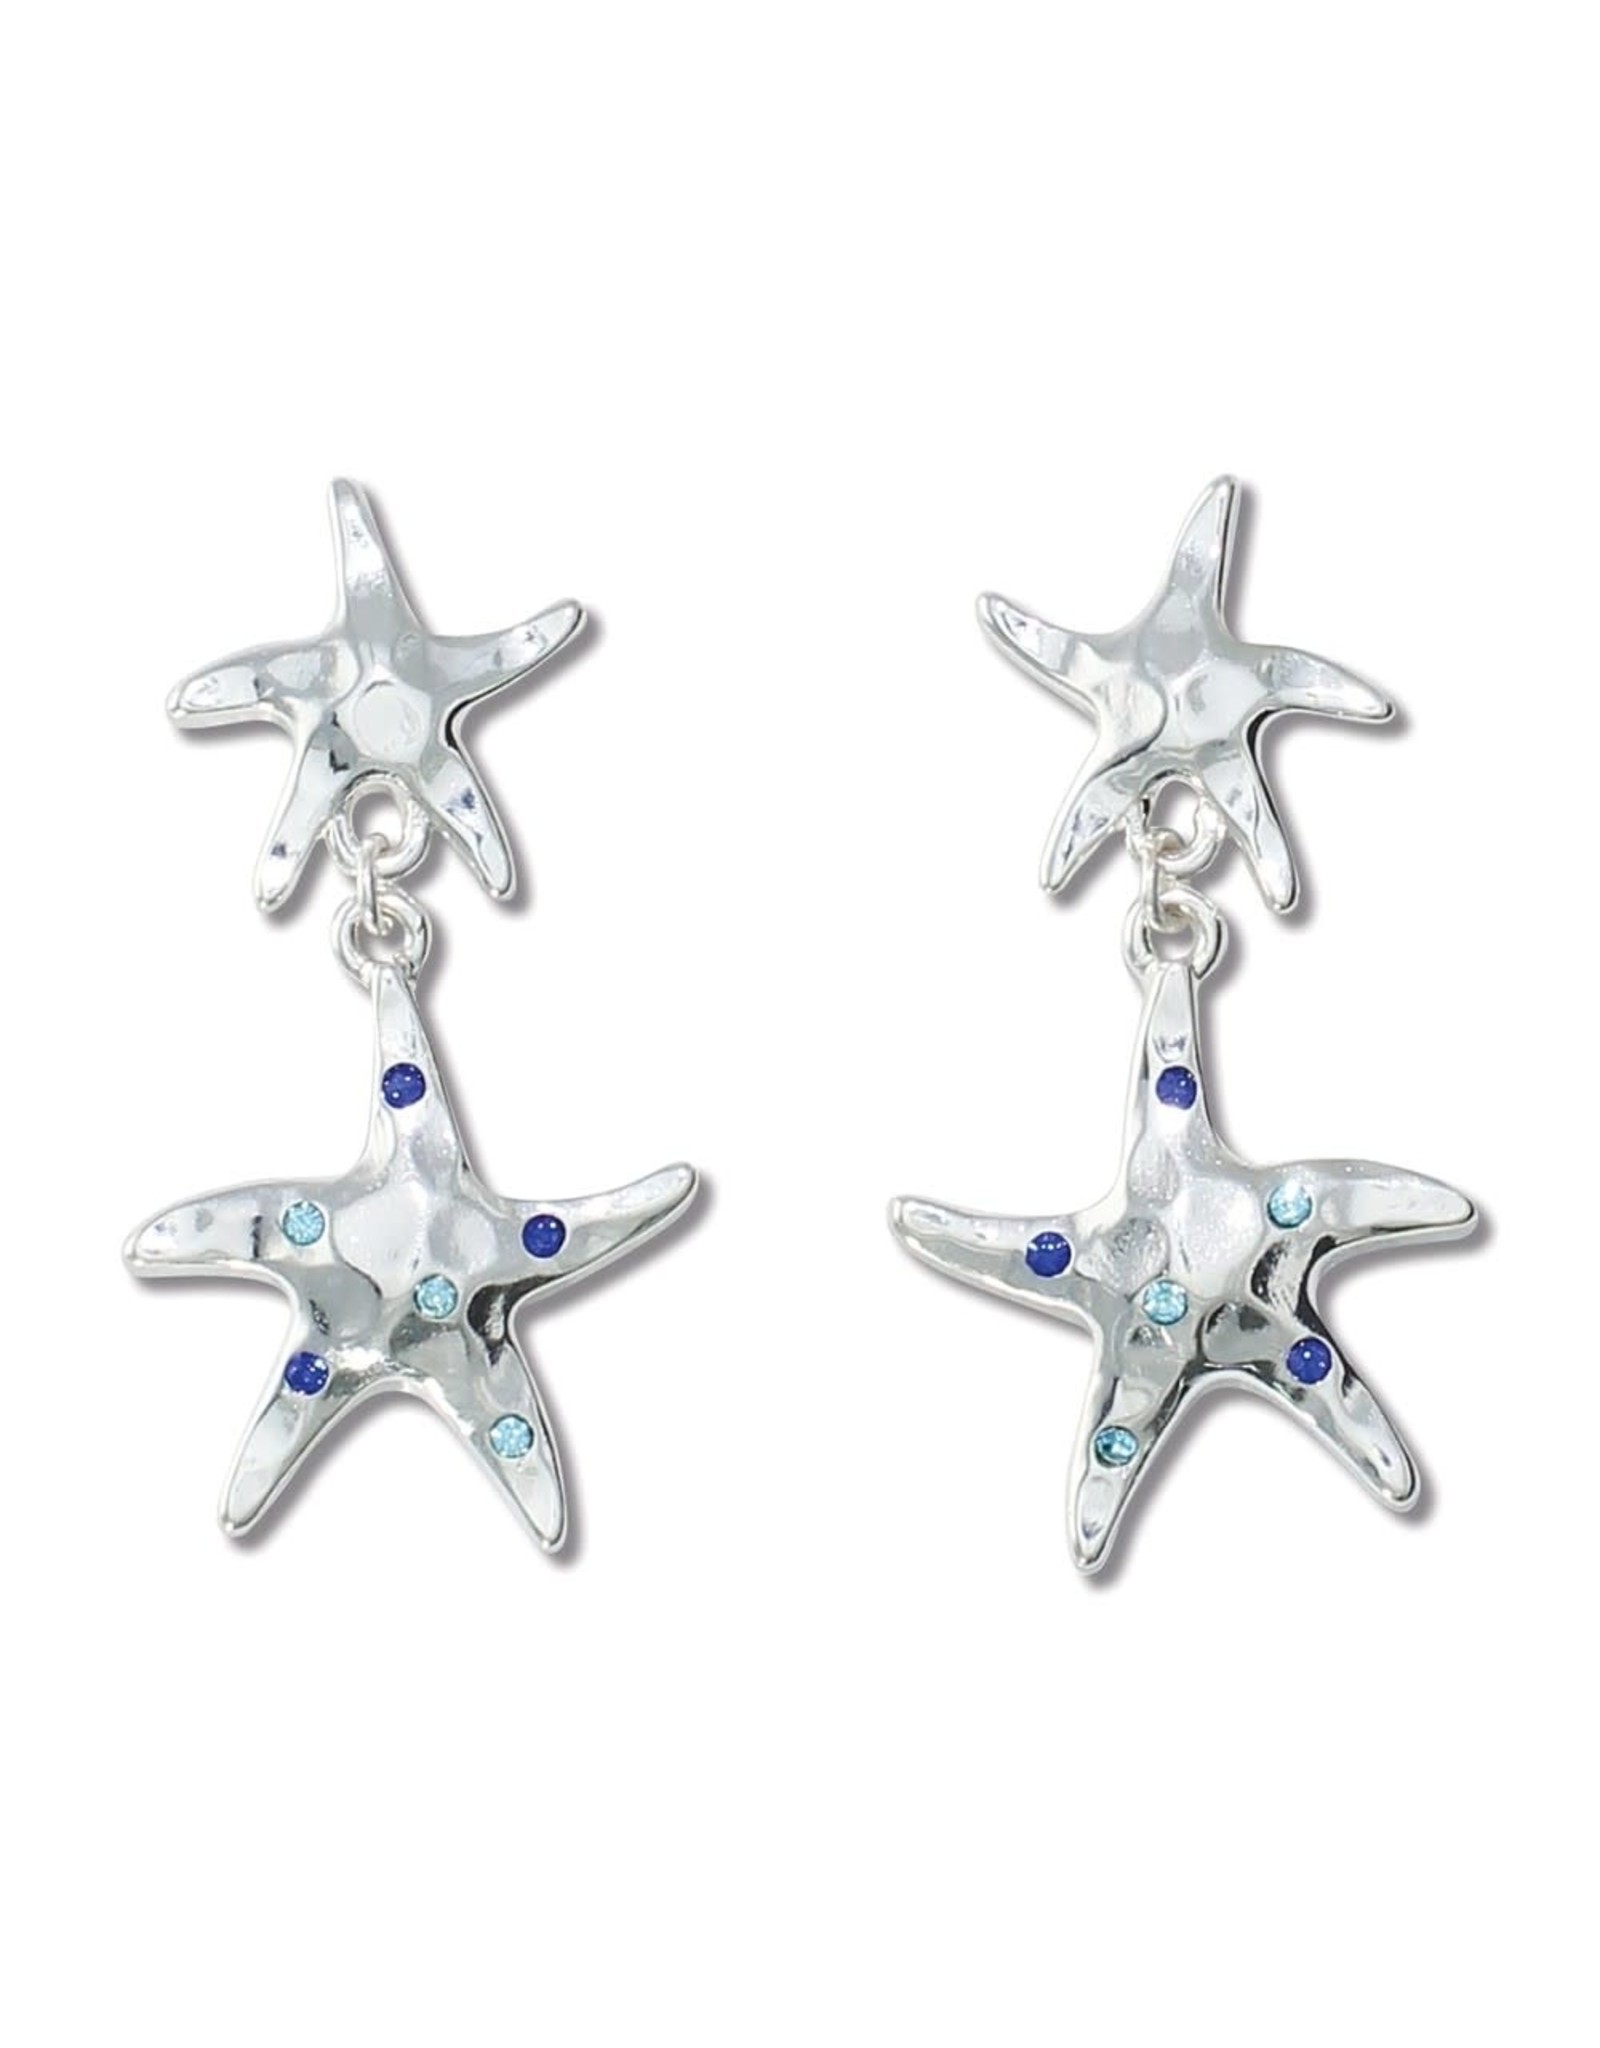 Periwinkle by Barlow Earrings Silver Hammered Starfish W Crystals